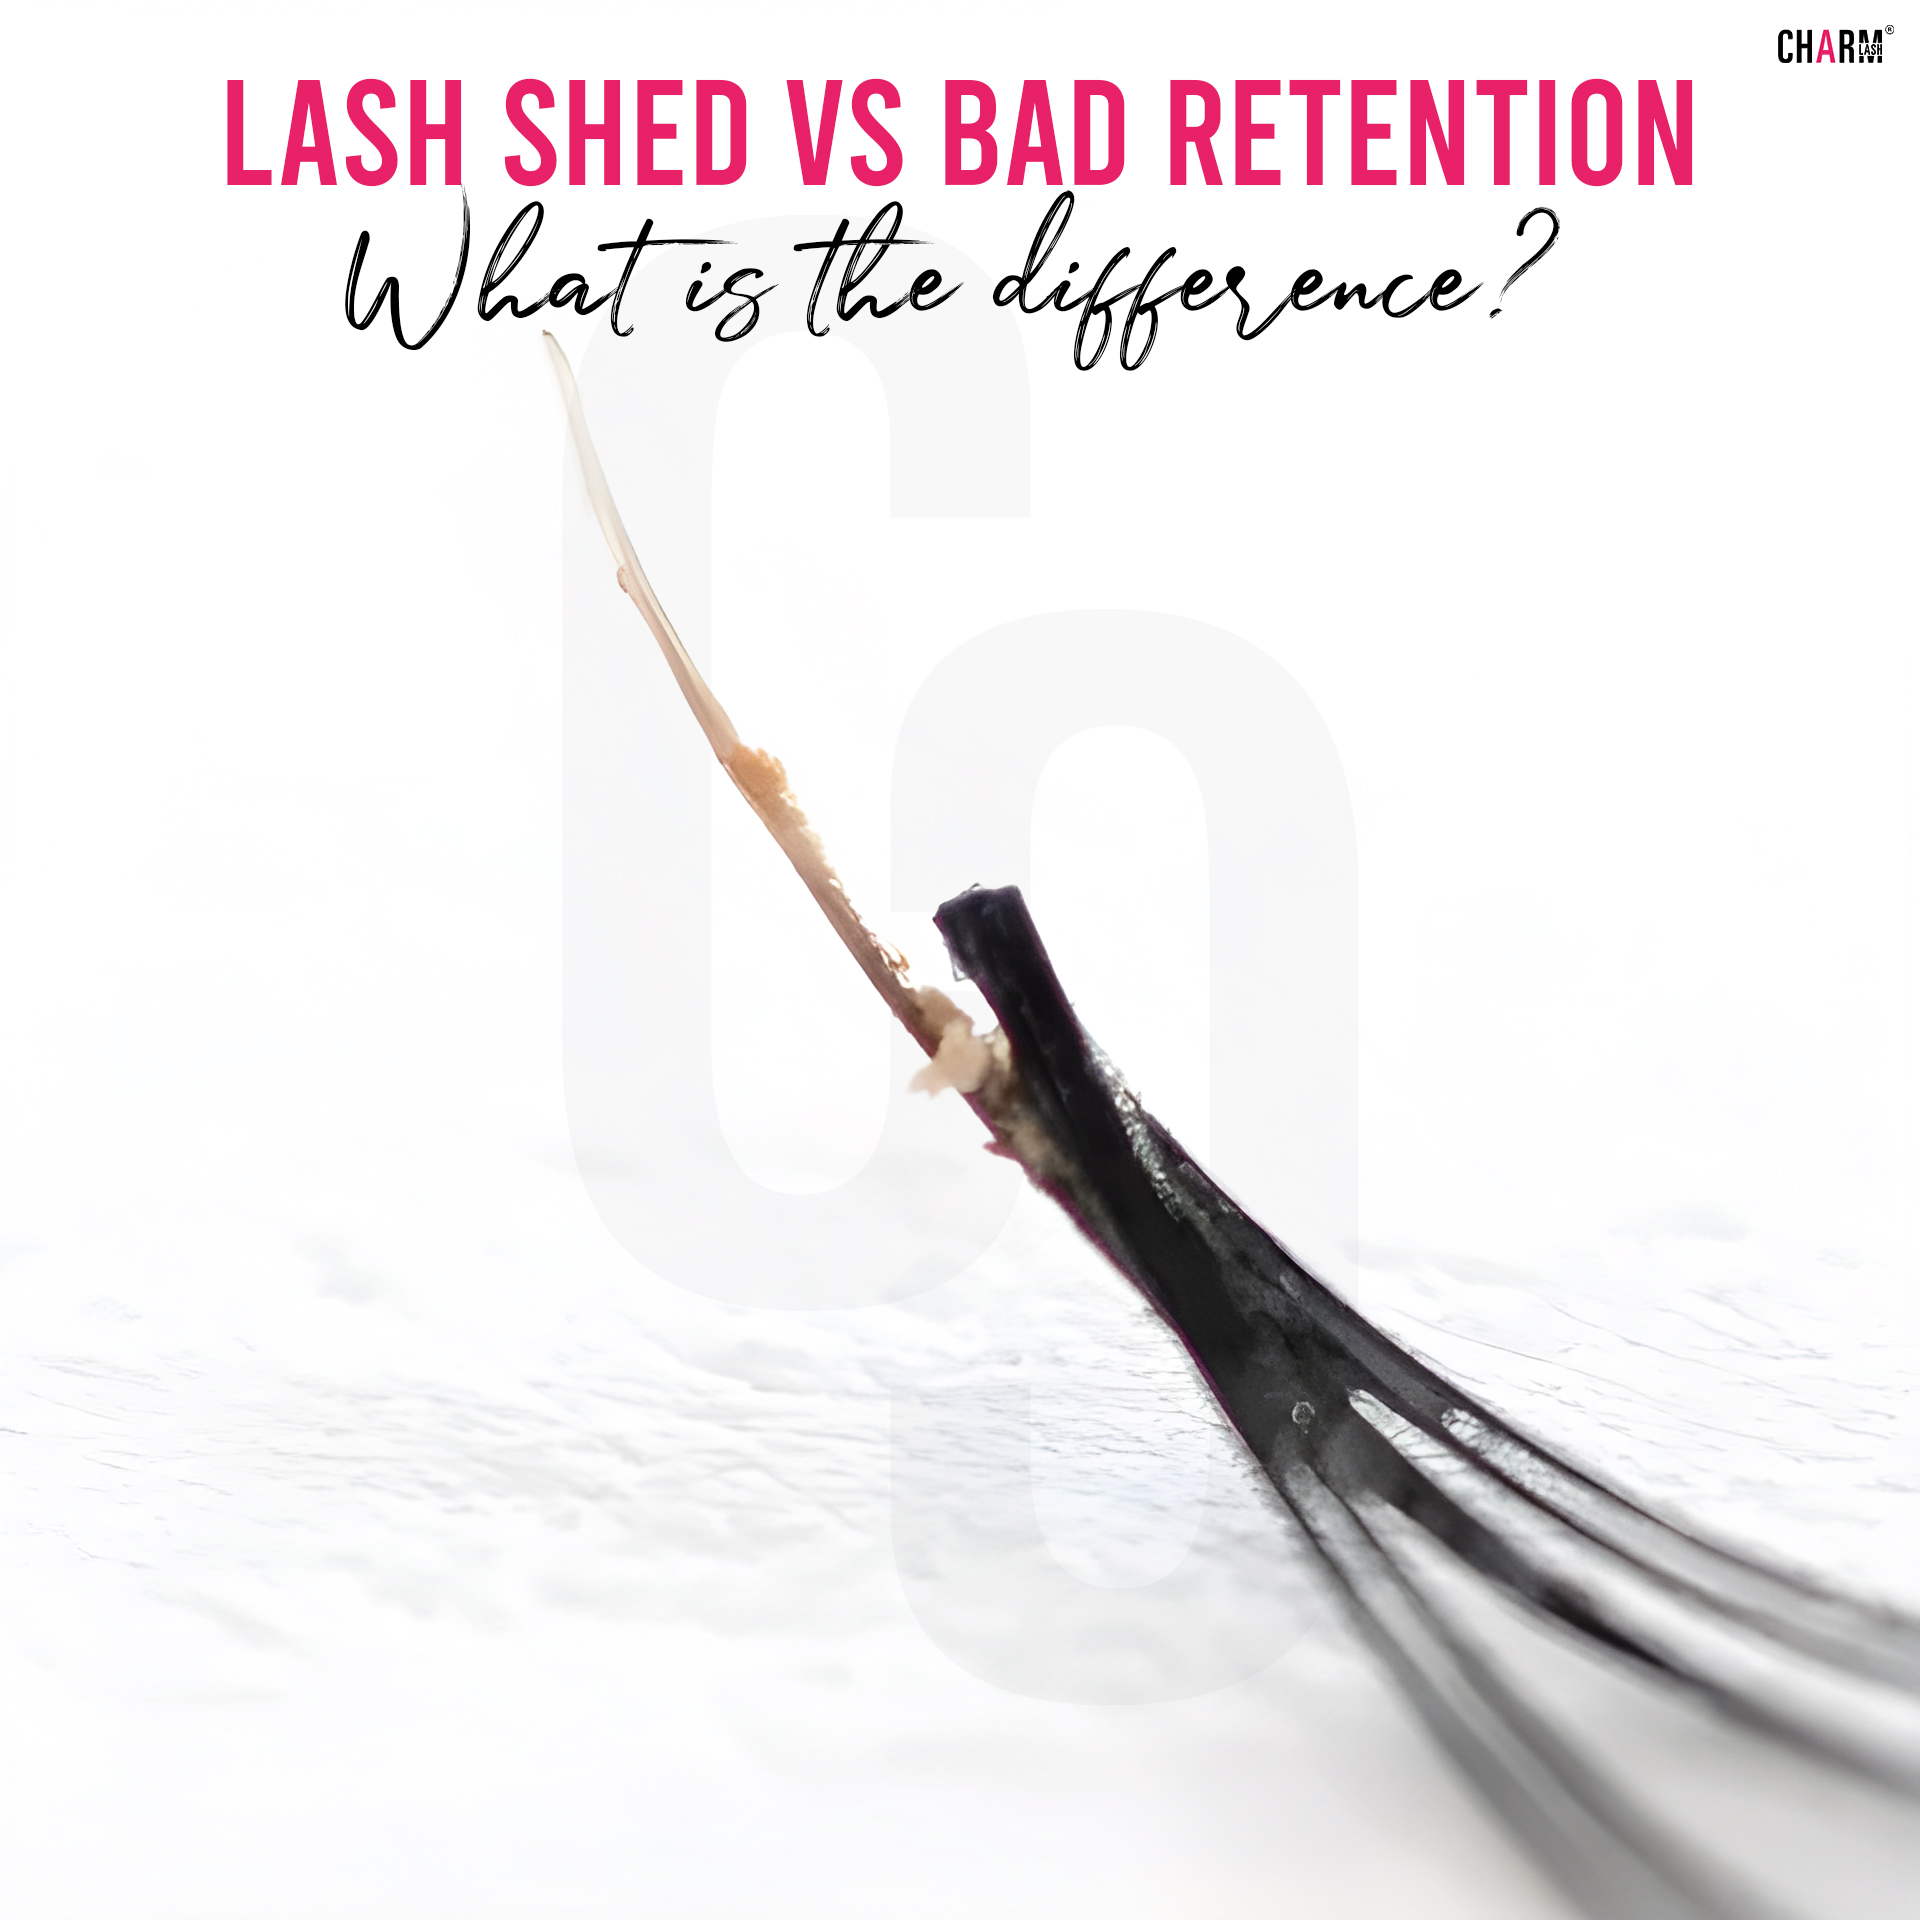 Lash shed vs bad retention- compare difference